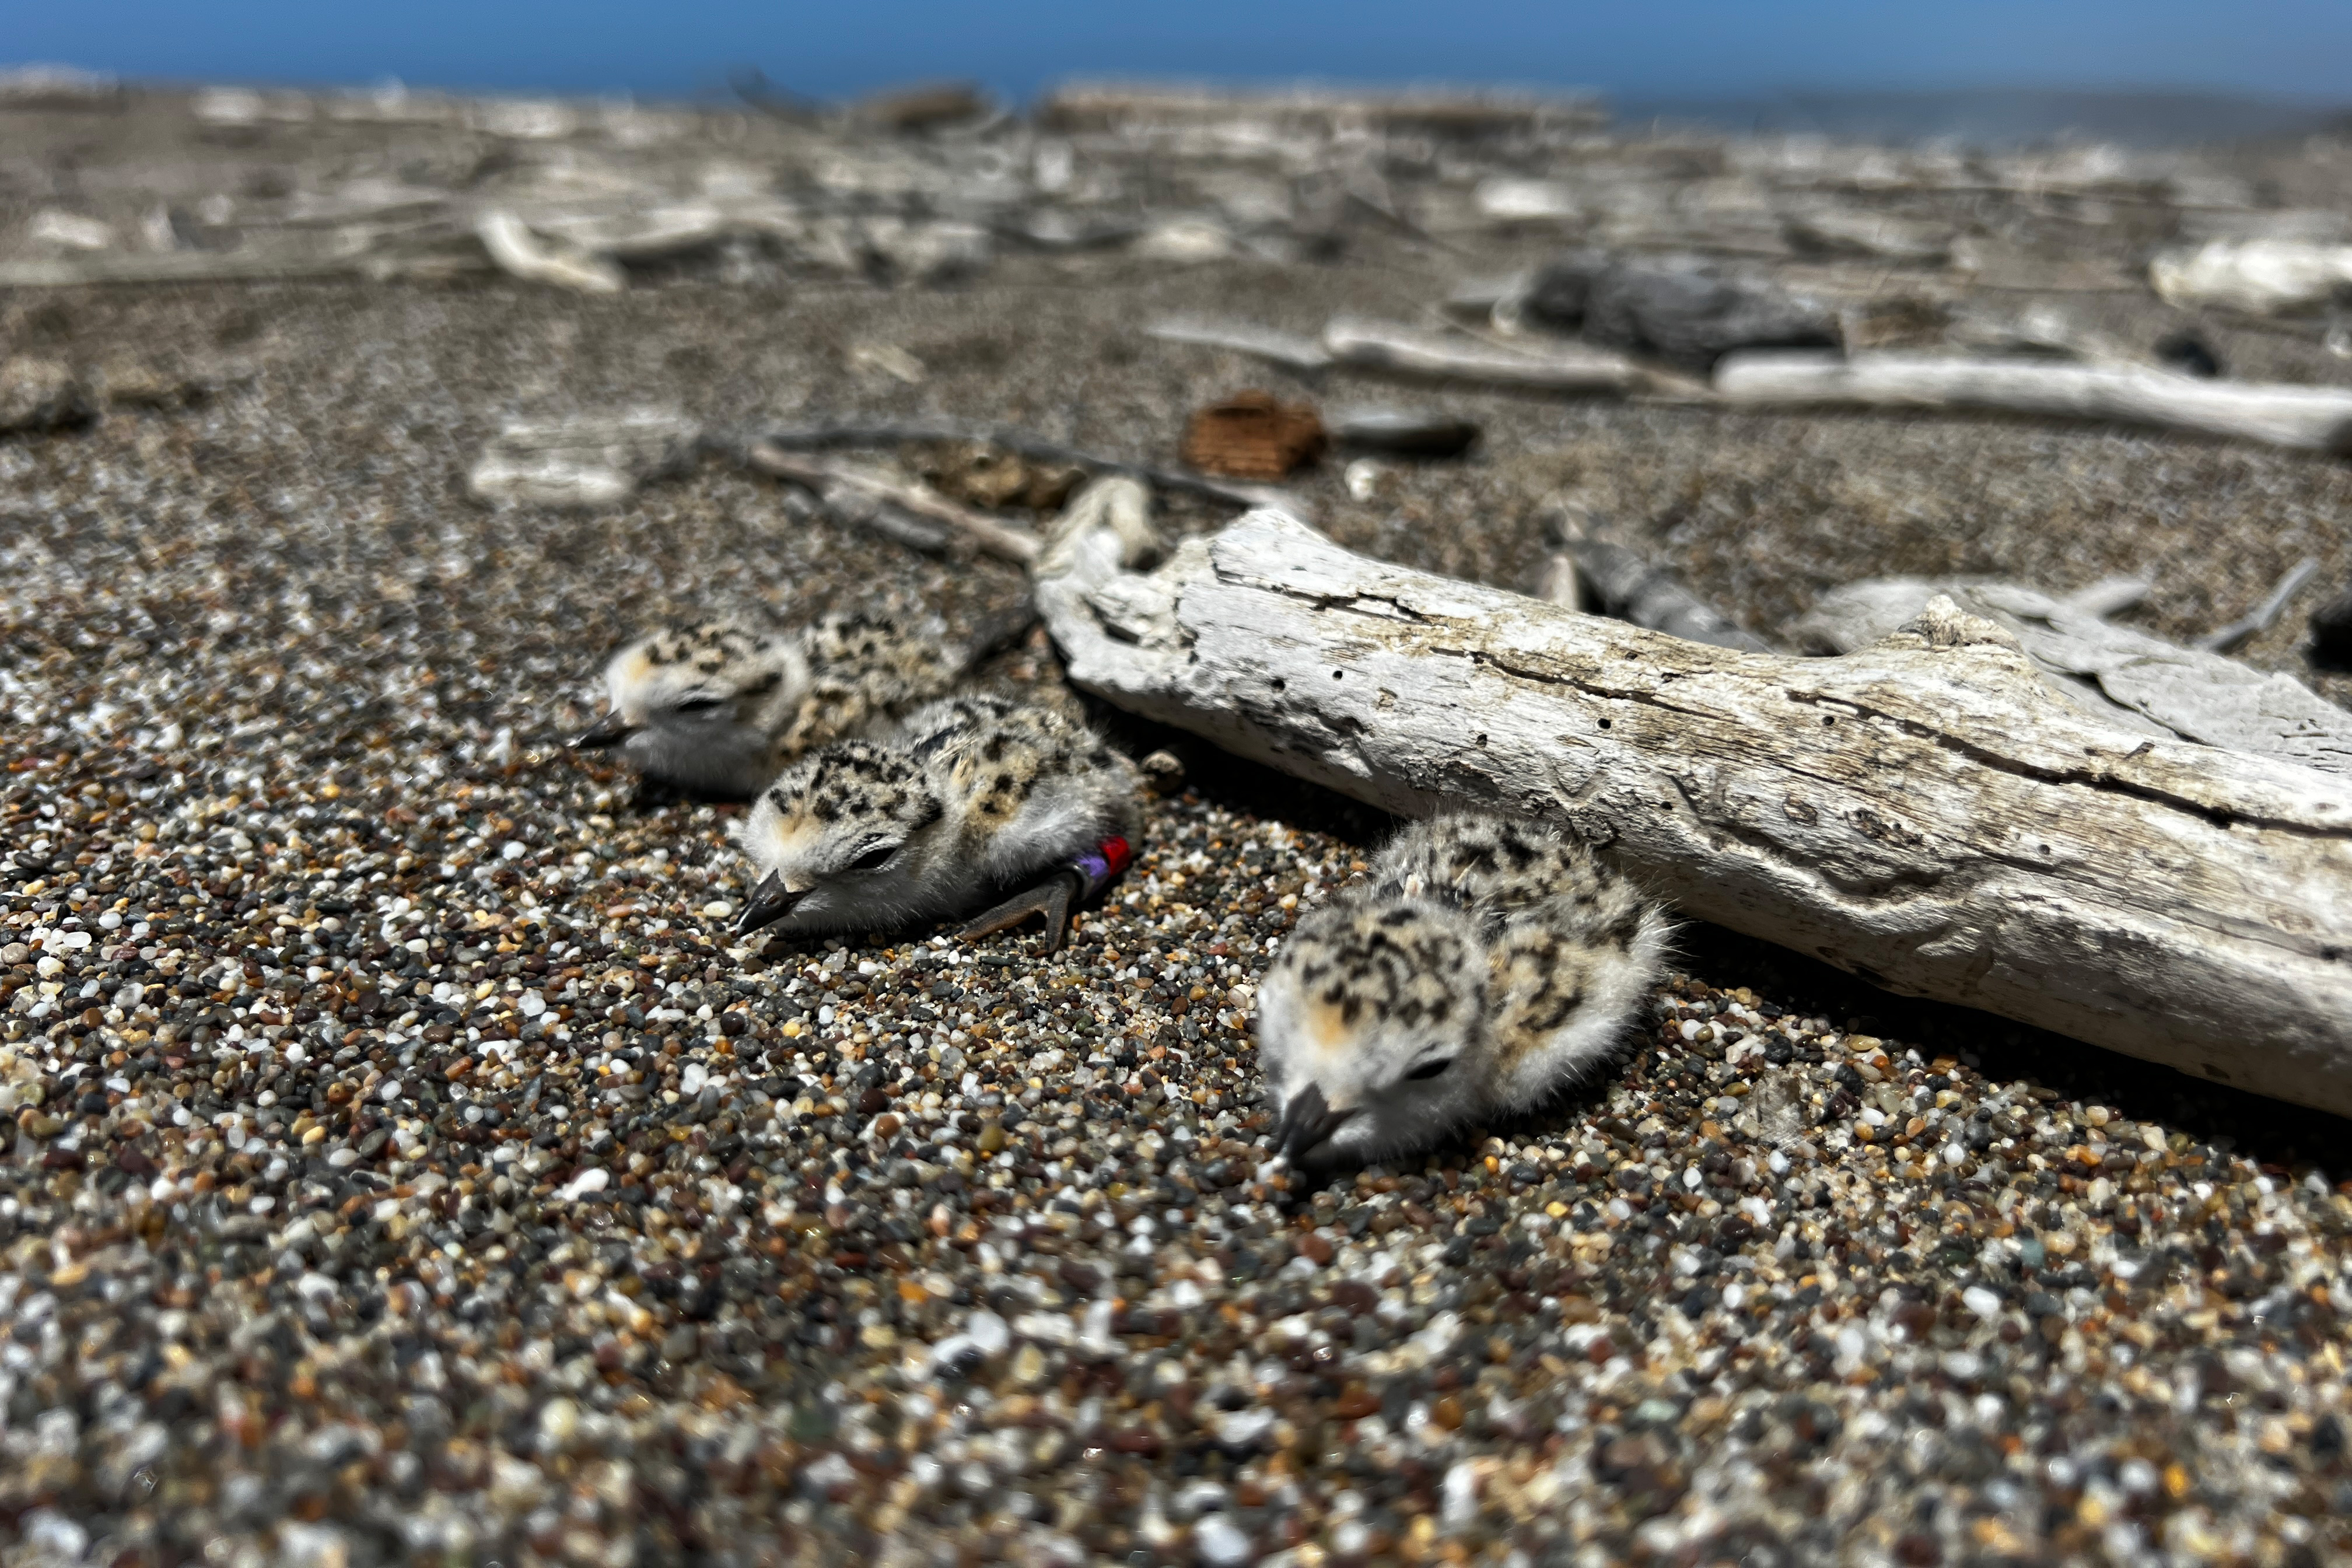 A photo of three small black-speckled, beige-colored shorebird chicks lying on sand adjacent to a long and thin piece of driftwood.